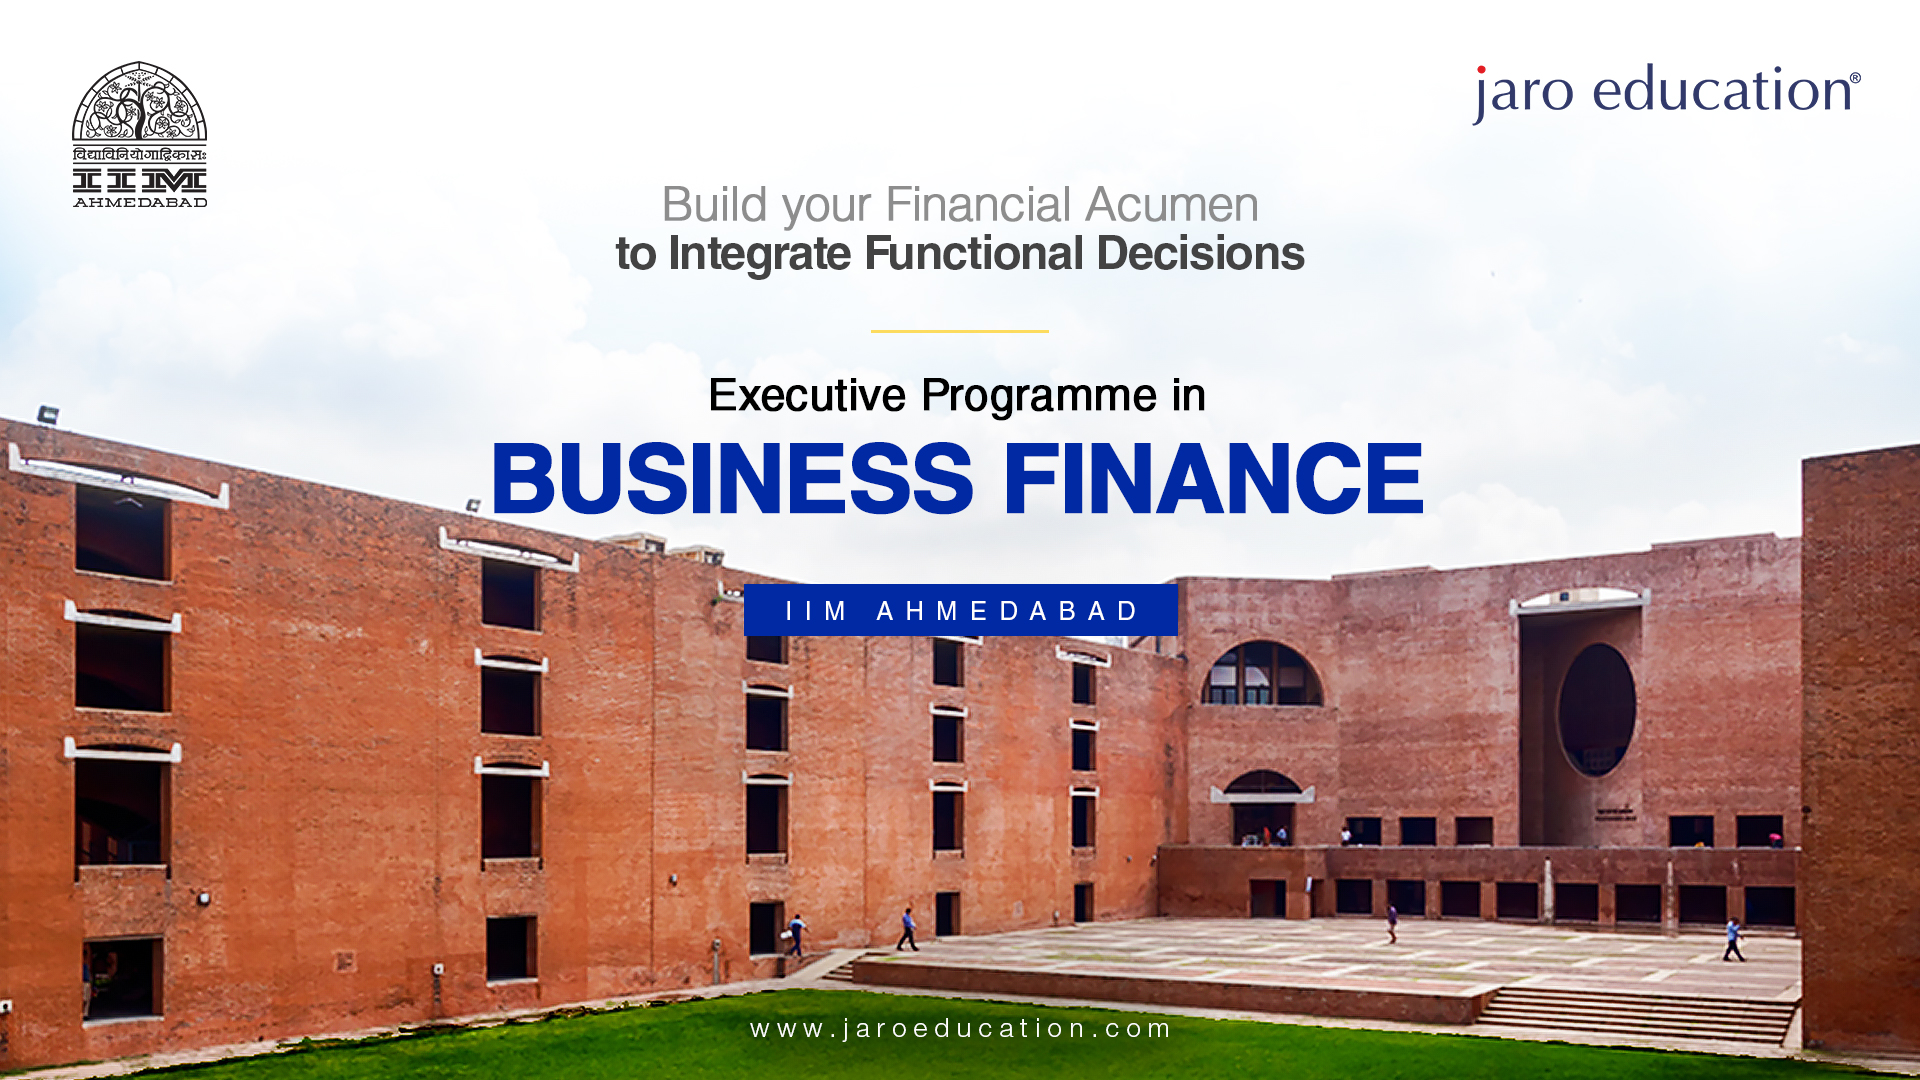 Business-Finance-to-Integrate-Functional-Decisions-Jaro